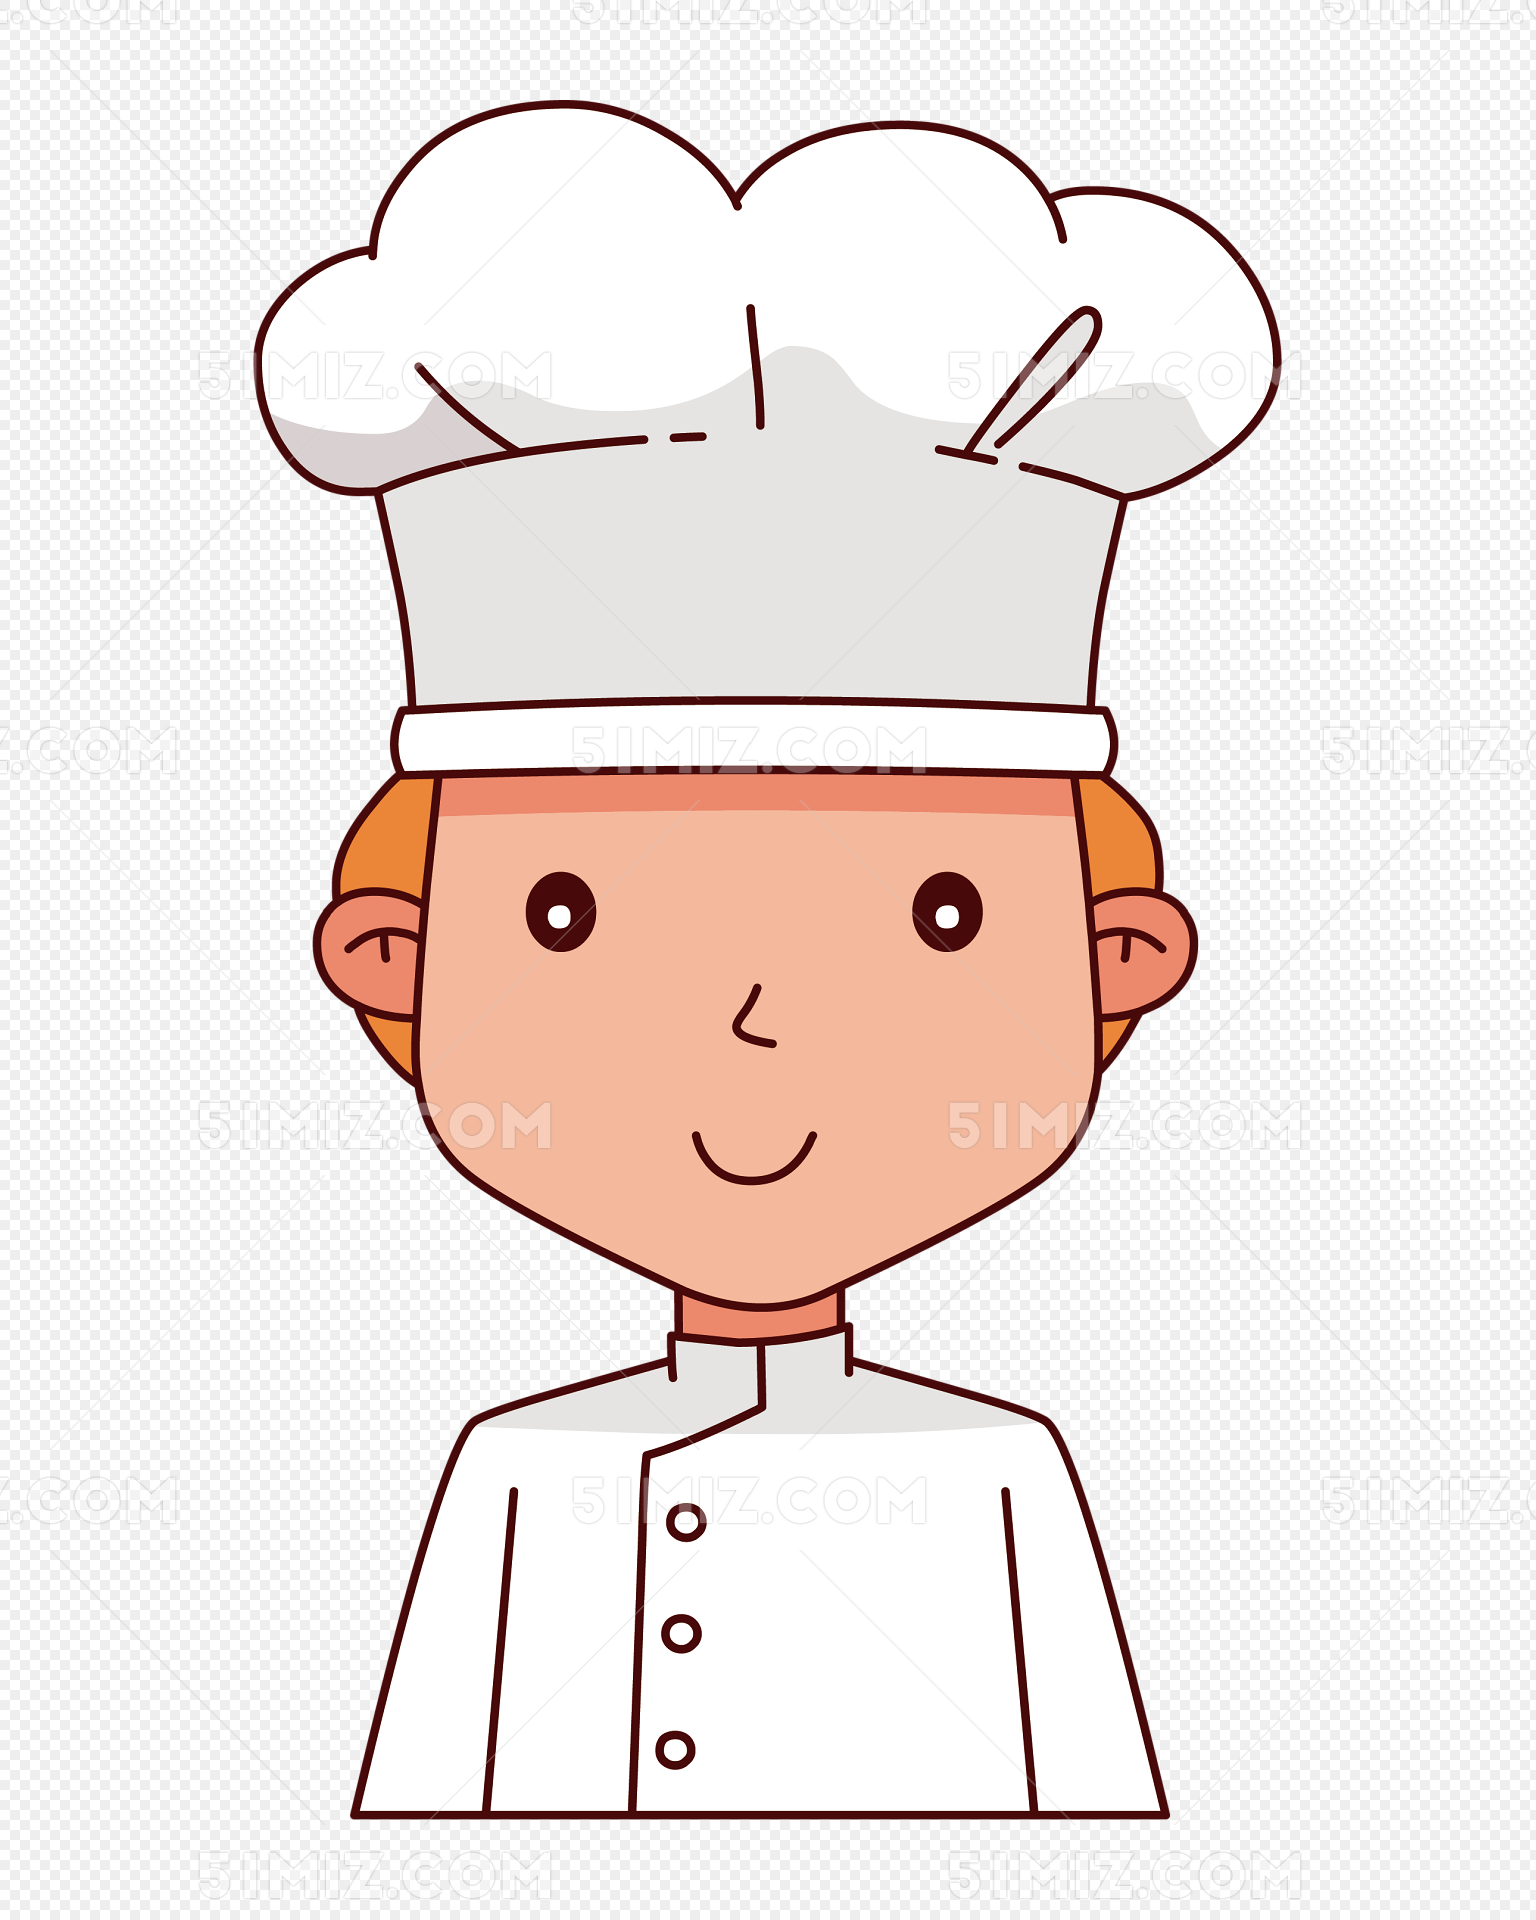 The little bakery girl chef is happy and smiling, tasty and sweet smile ...